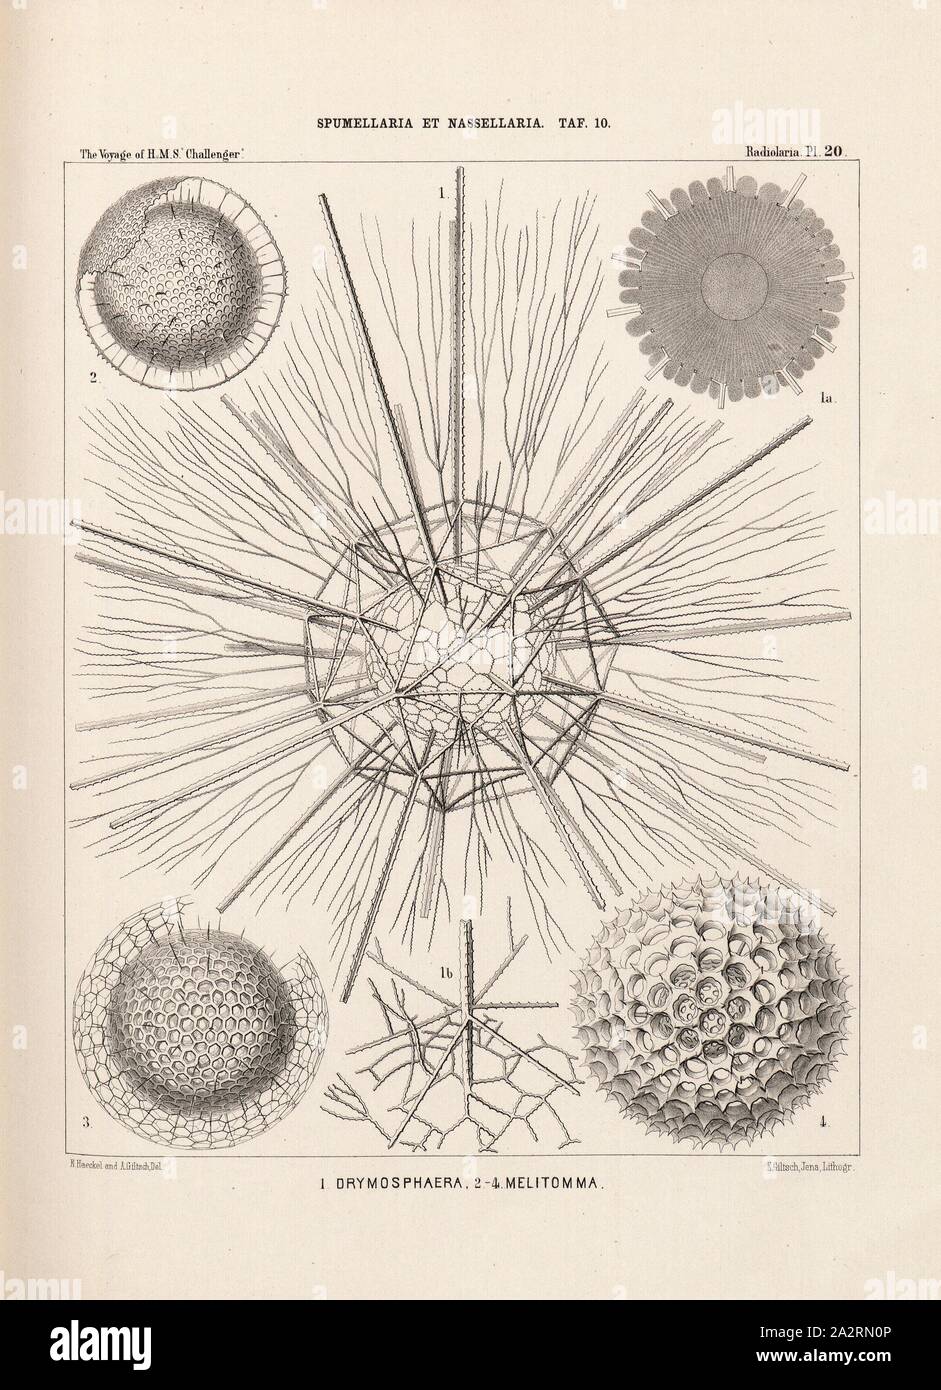 Woodpecker, Honeymoon, Illustration of various radiolarians of the Spumellaria and Nassellaria groups from the 19th century, signed: E.Haeckel and A. Giltsch Del, F. Giltsch, Jena, Lithogr, Pl. 20, after p. 248, Haeckel, Ernst (del.); Giltsch, A. (del.); Giltsch, F. (lith.); Jena (lith.), 1862, Ernst Haeckel: Die Radiolarien (Rhizopoda Radiaria). Zweiter Theil. Berlin: Verlag von Georg Reimer, 1862 Stock Photo